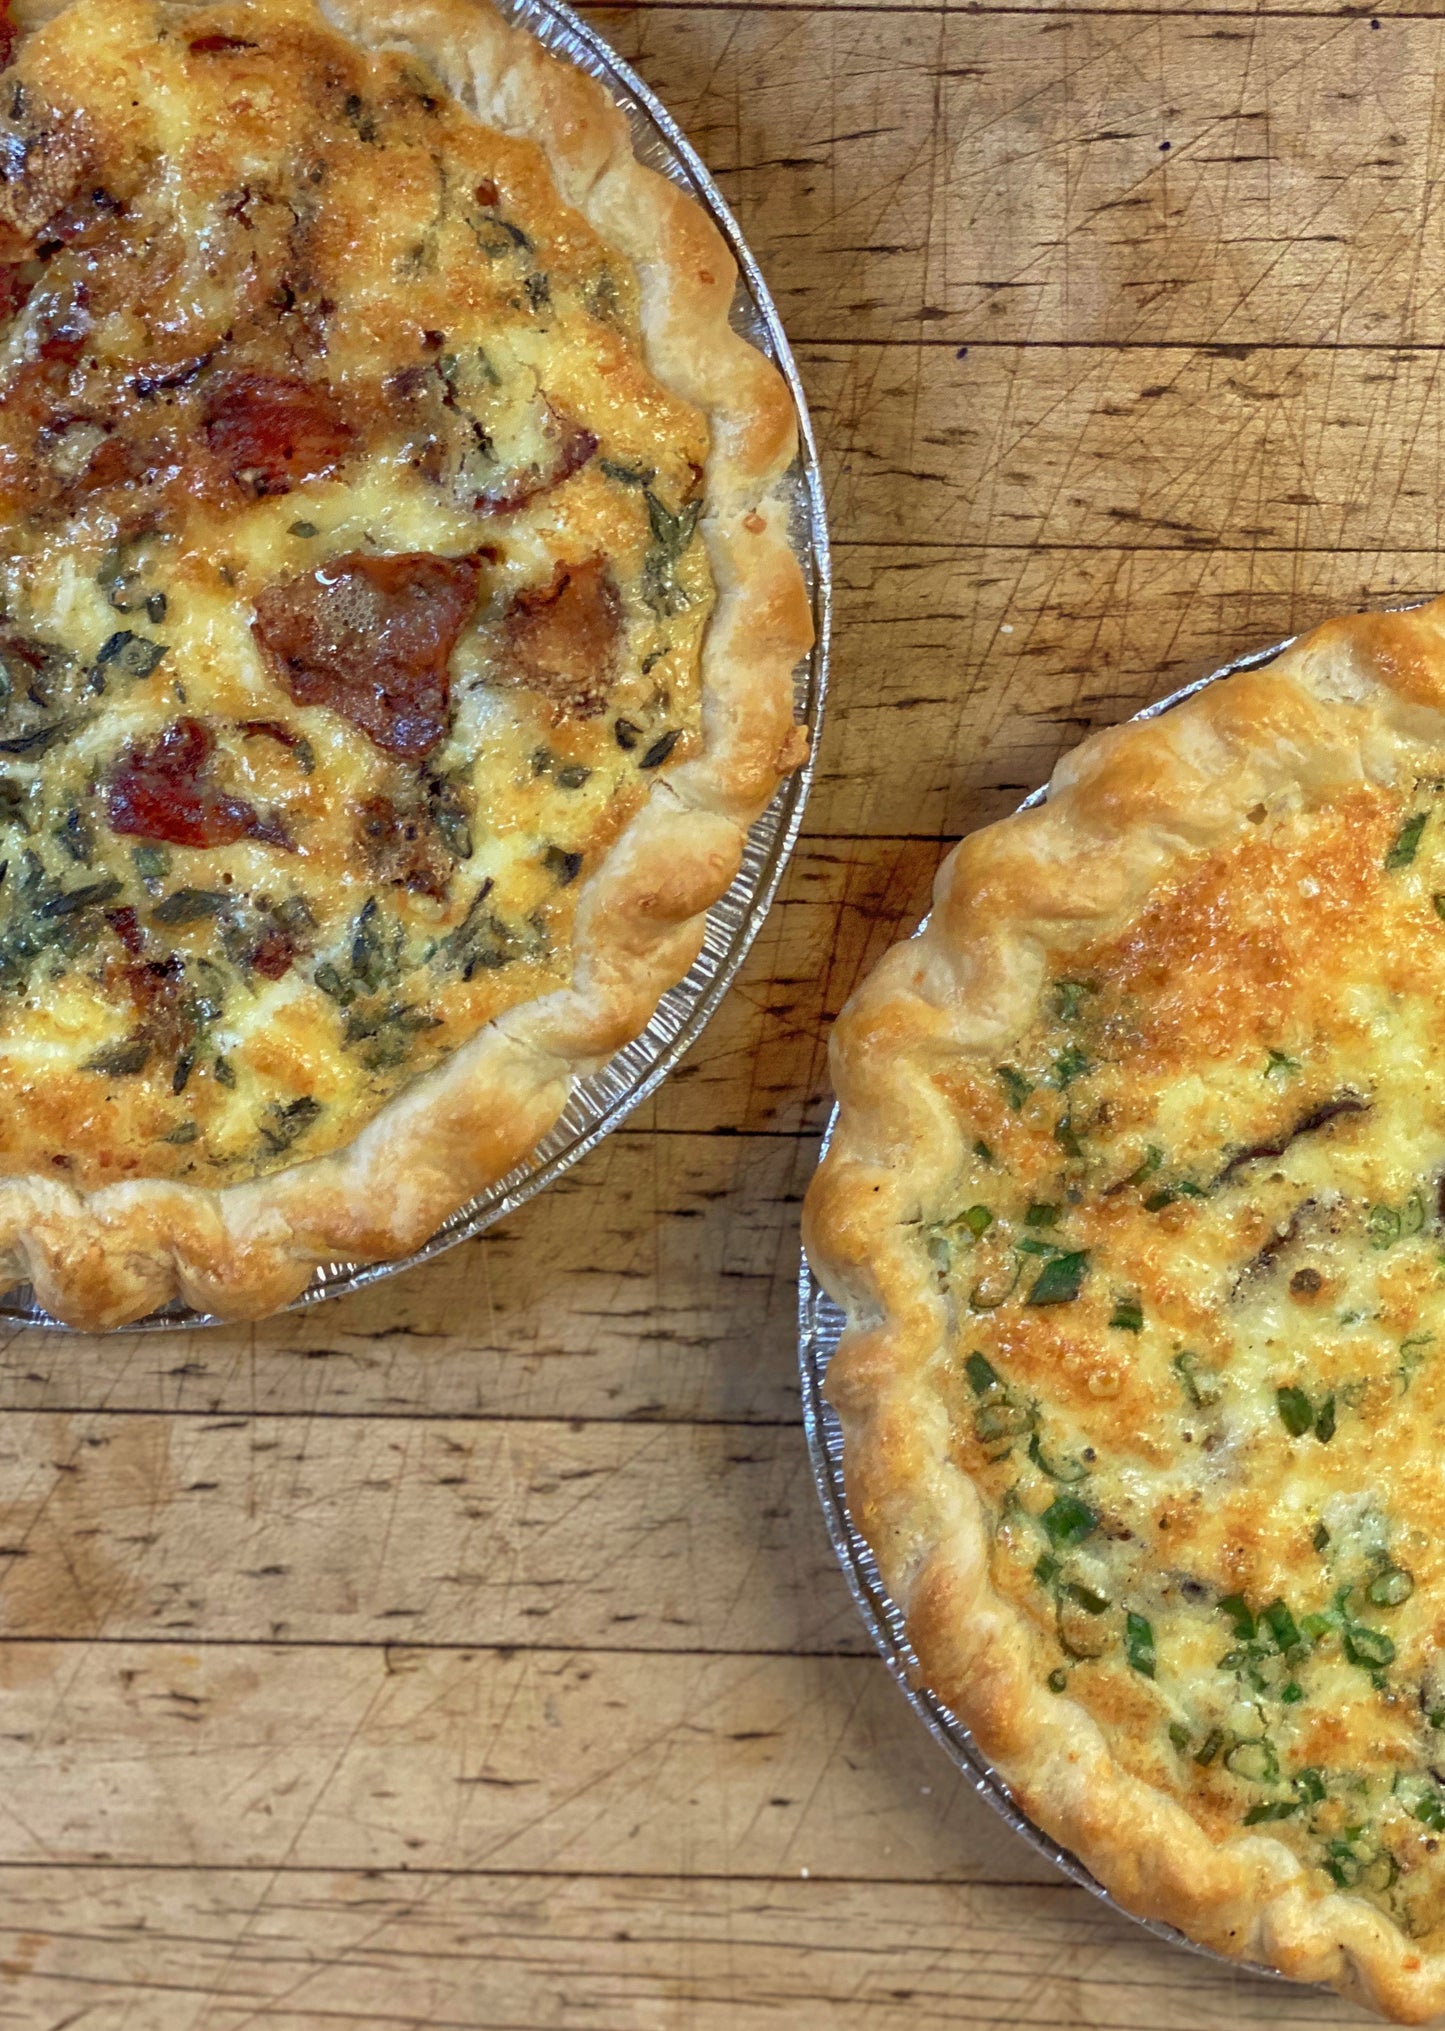 quiche meal kit delivery charlotte nc